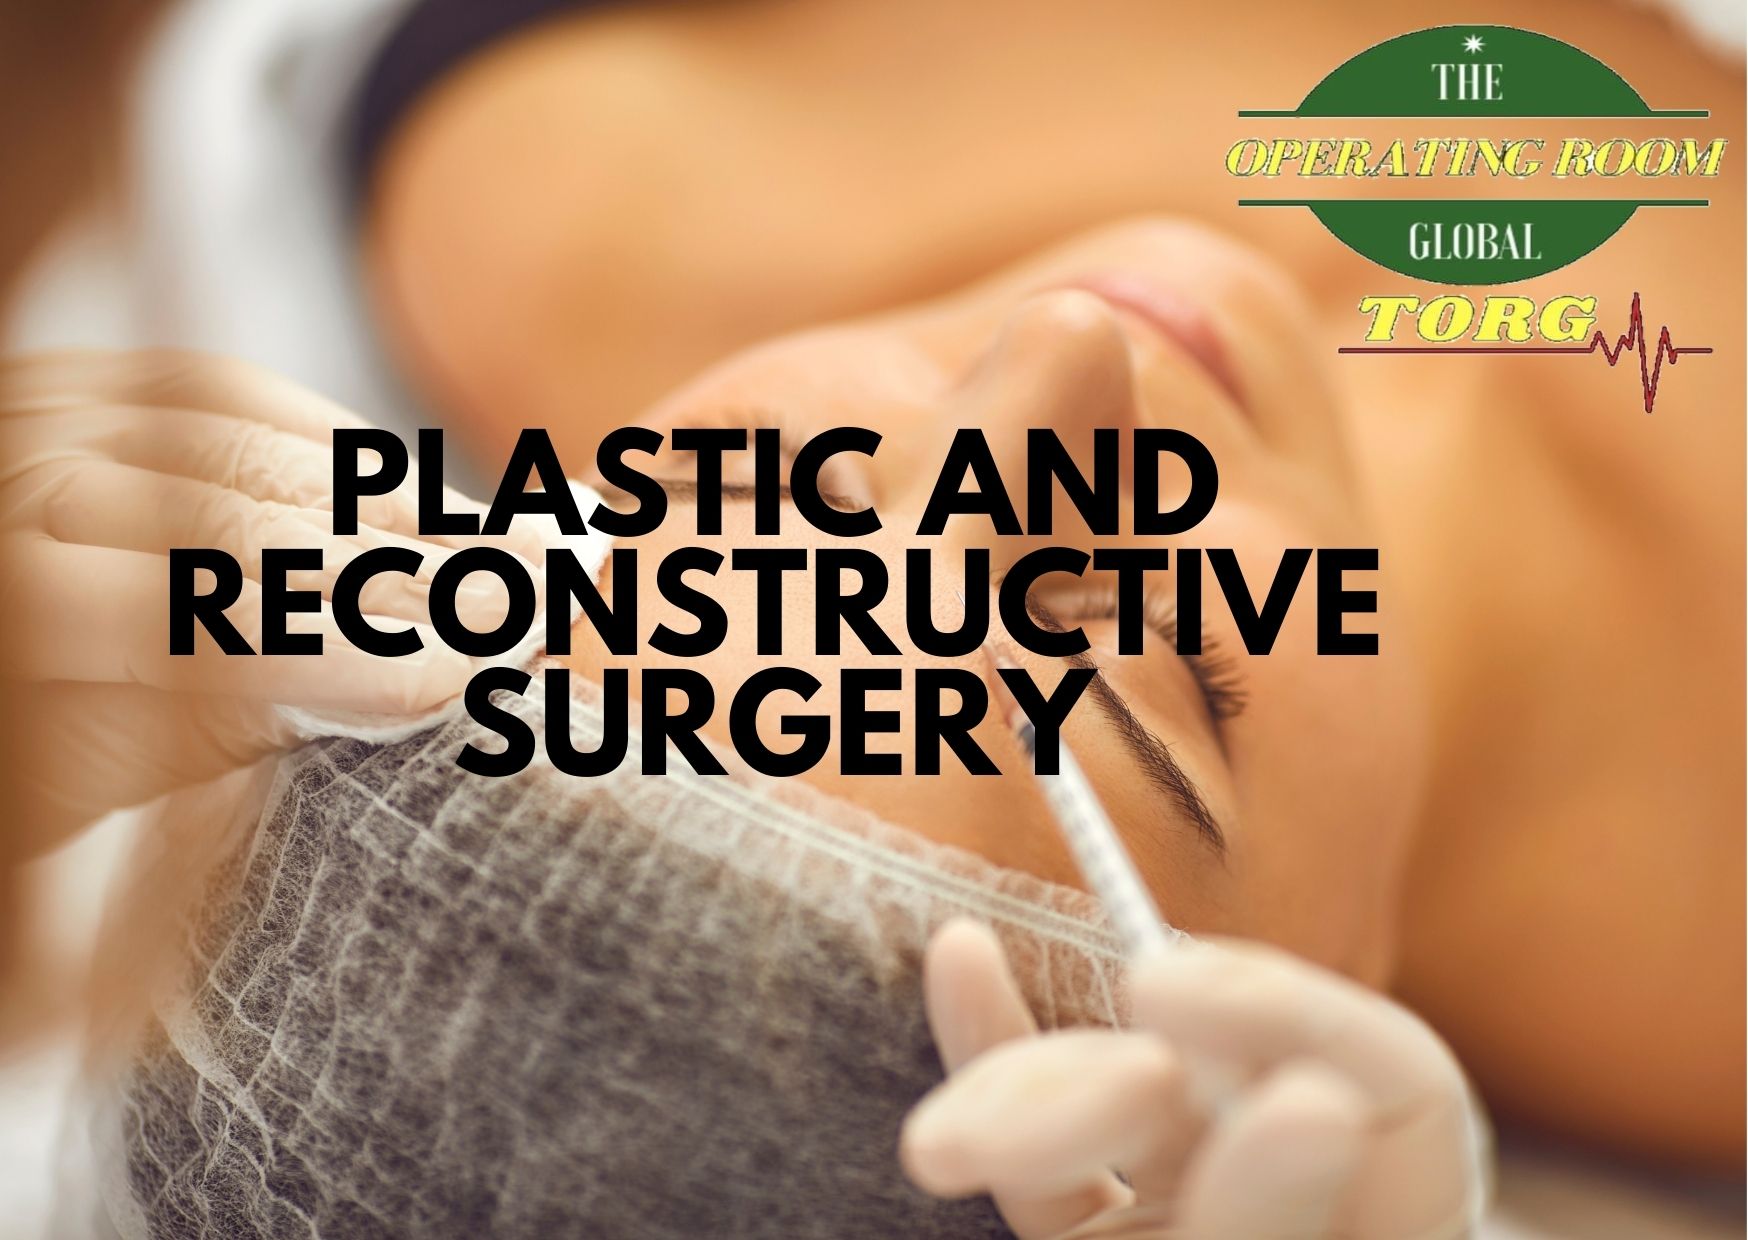 Plastic Surgery vs. Cosmetic Surgery vs. Reconstructive Surgery: What’s the Difference?